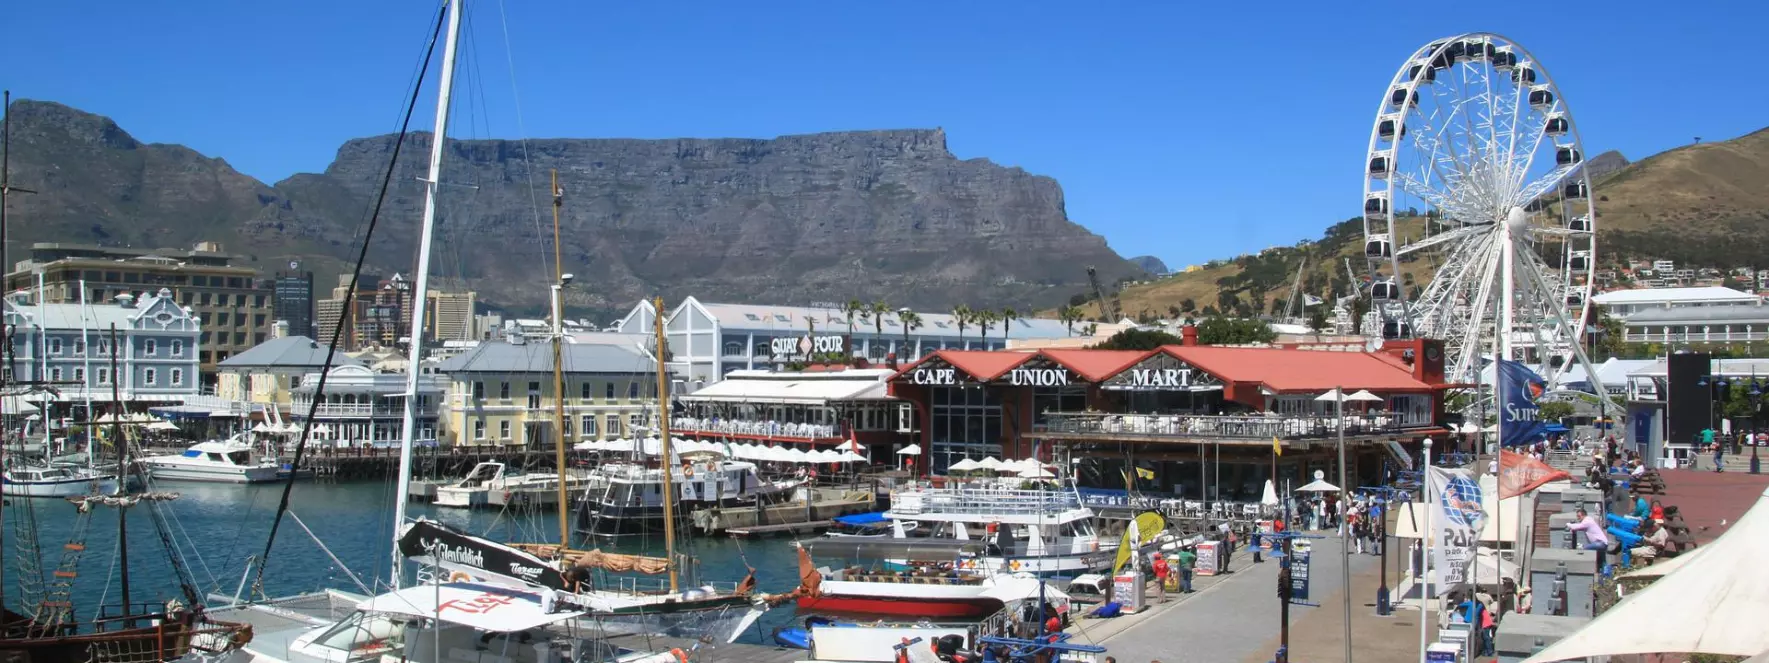 cape wheel - things to do in cape town under R200